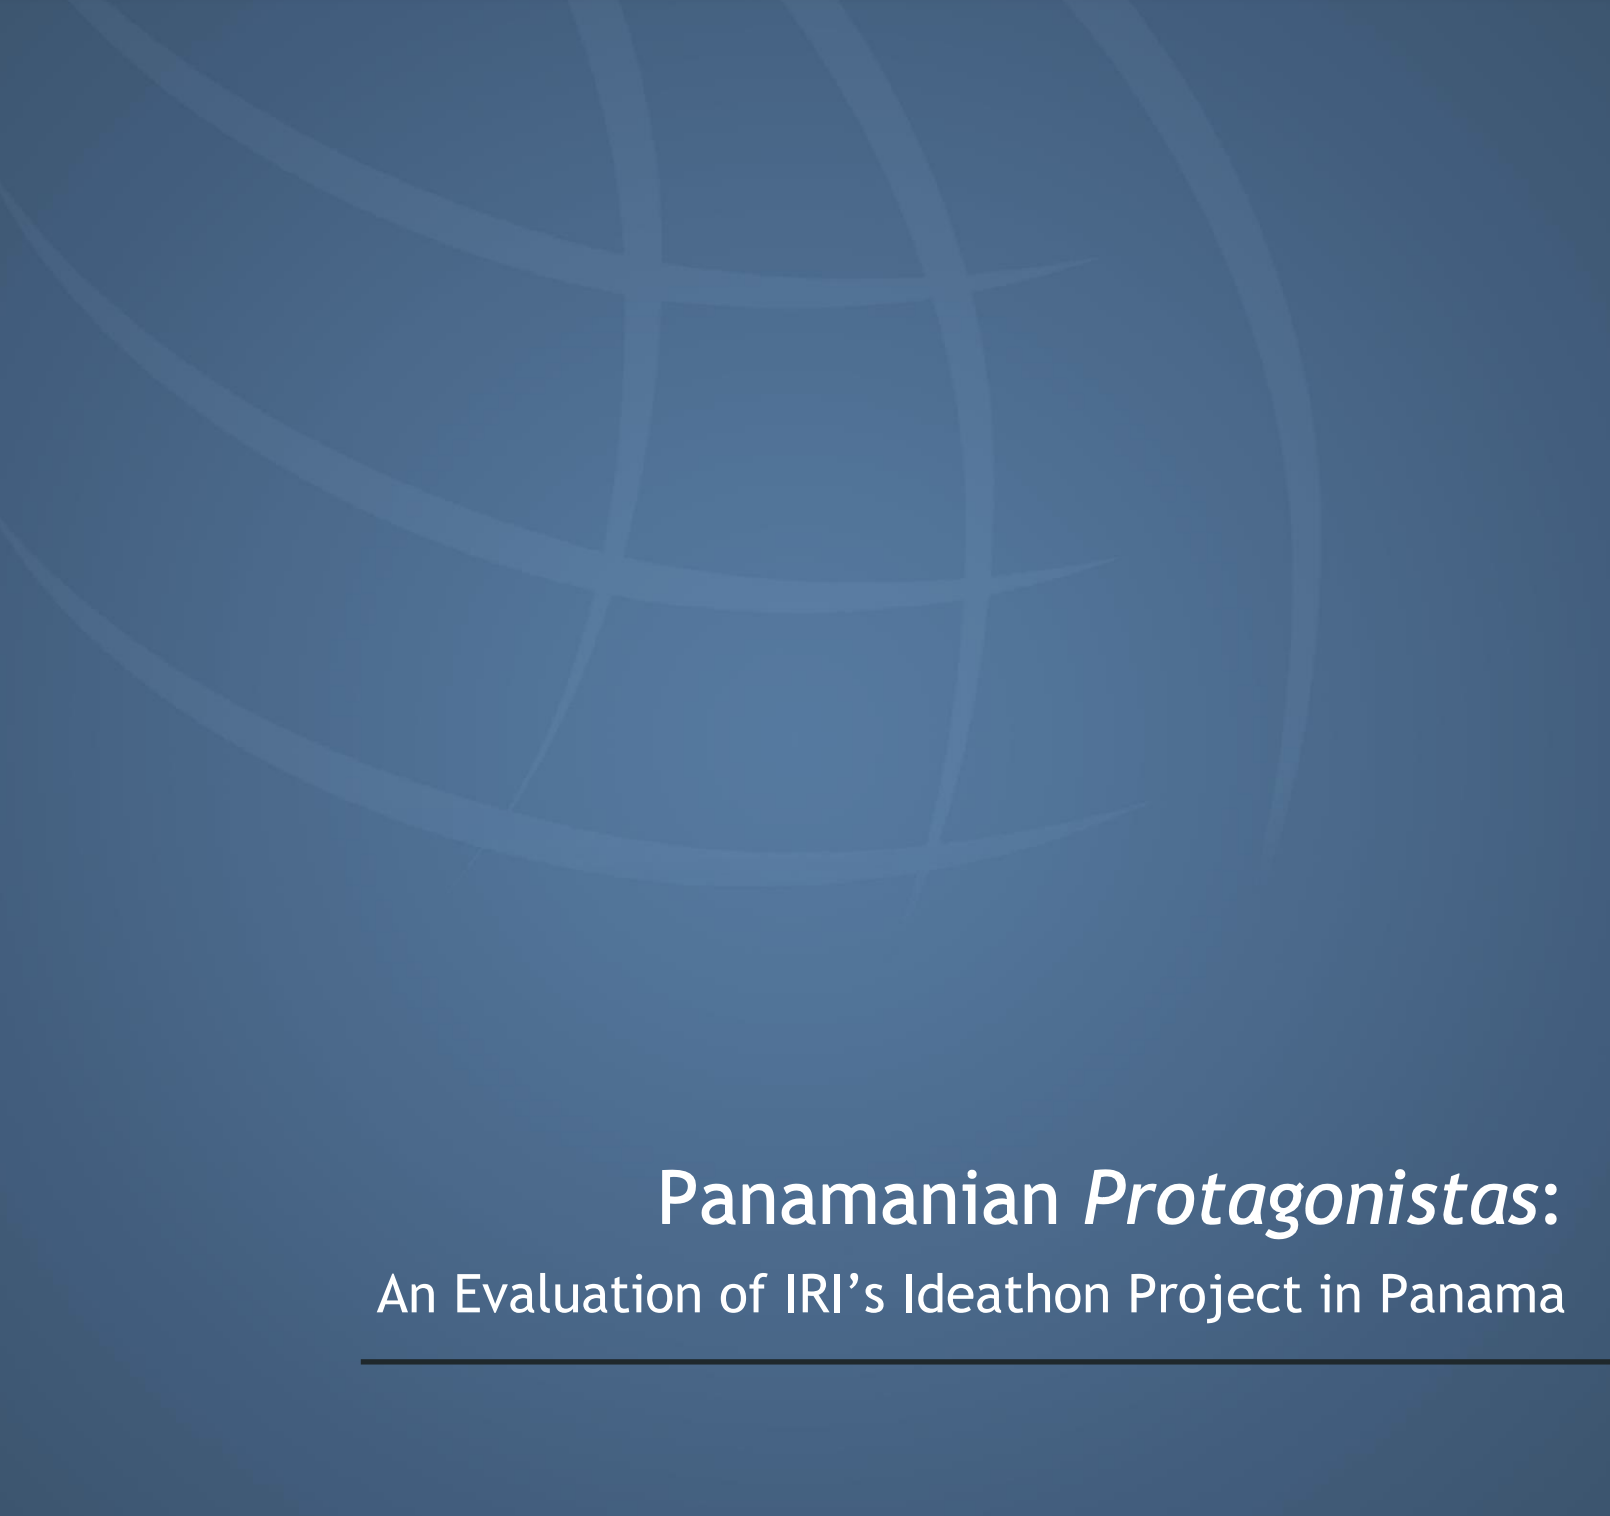 Panamanian Protagonistas: An Evaluation of IRI’s Ideathon Project in Panama